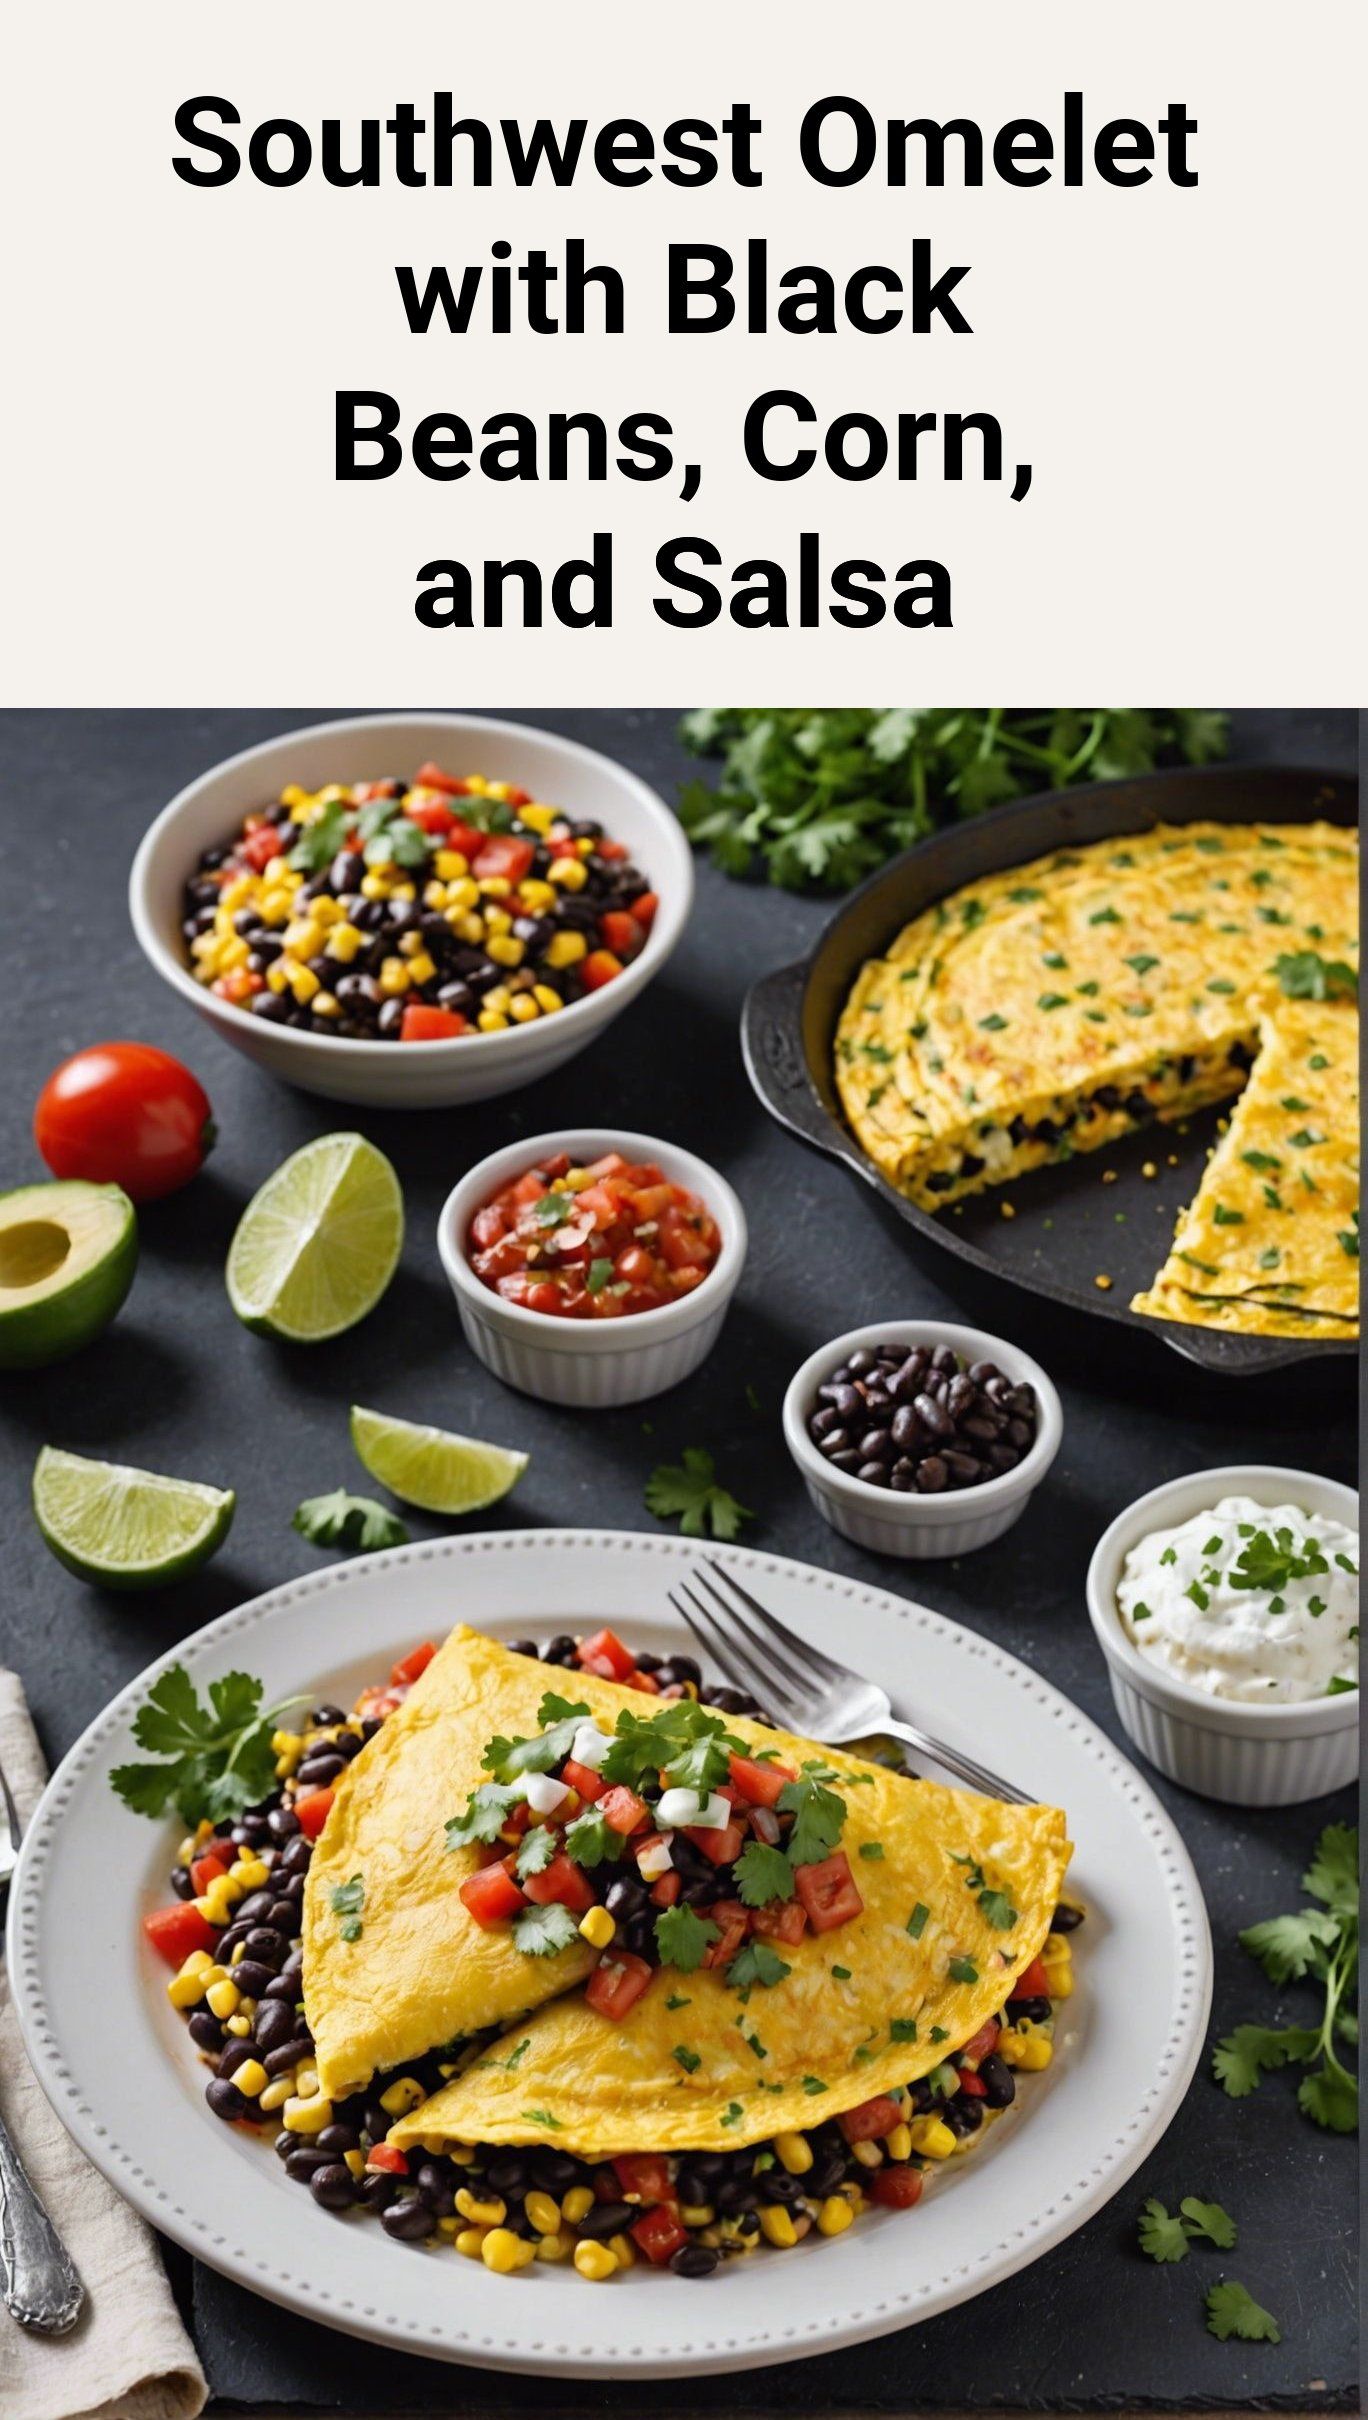 Southwest Omelet with Black Beans, Corn, and Salsa